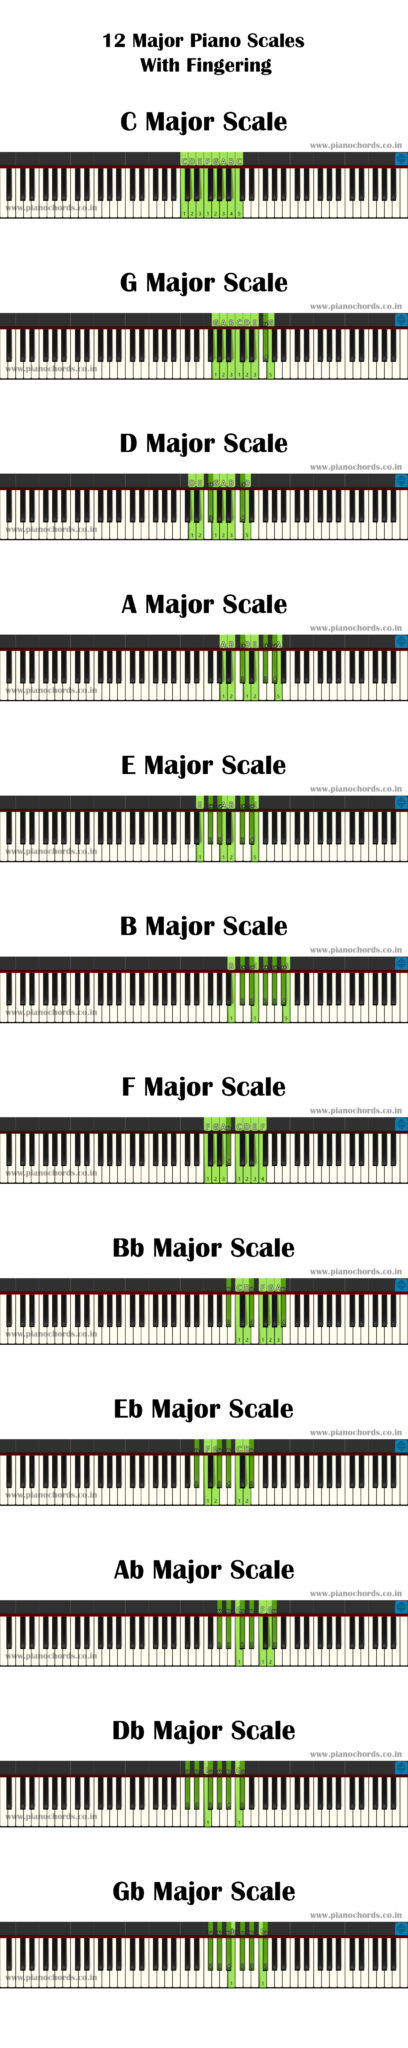 piano music major scales and fingering pdf